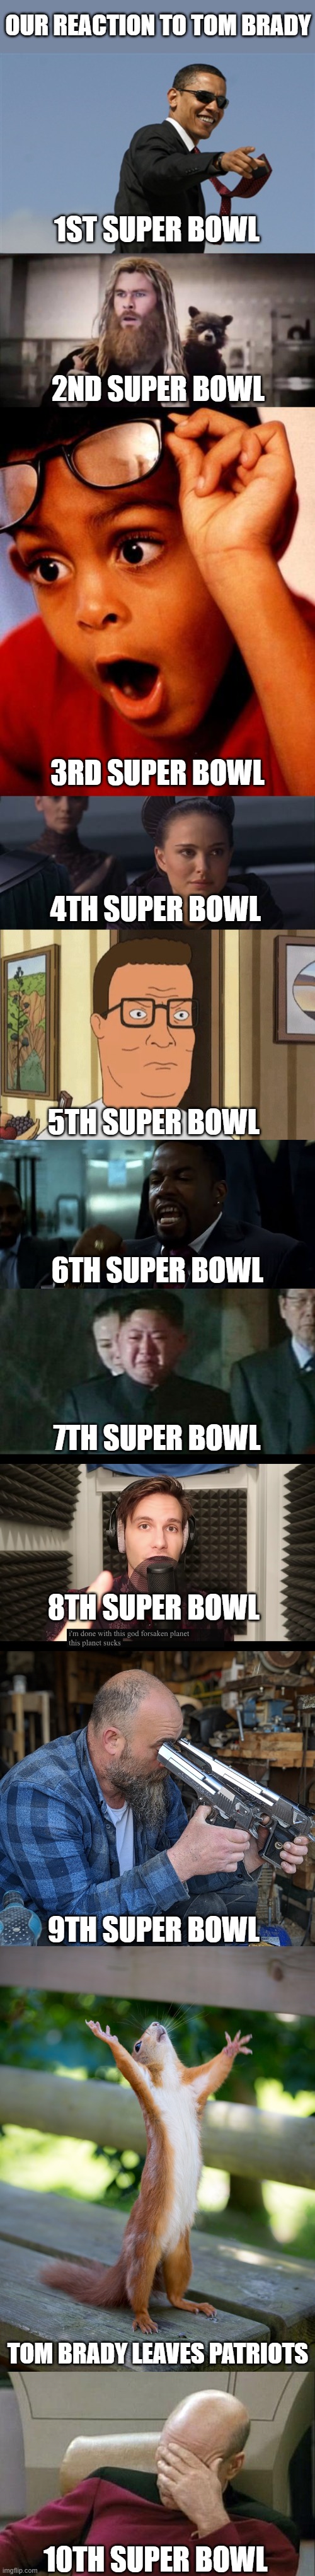 Not again... | OUR REACTION TO TOM BRADY; 1ST SUPER BOWL; 2ND SUPER BOWL; 3RD SUPER BOWL; 4TH SUPER BOWL; 5TH SUPER BOWL; 6TH SUPER BOWL; 7TH SUPER BOWL; 8TH SUPER BOWL; 9TH SUPER BOWL; TOM BRADY LEAVES PATRIOTS; 10TH SUPER BOWL | image tagged in memes,cool obama,impressed thor,wow,perturbed portman,dang it biden | made w/ Imgflip meme maker